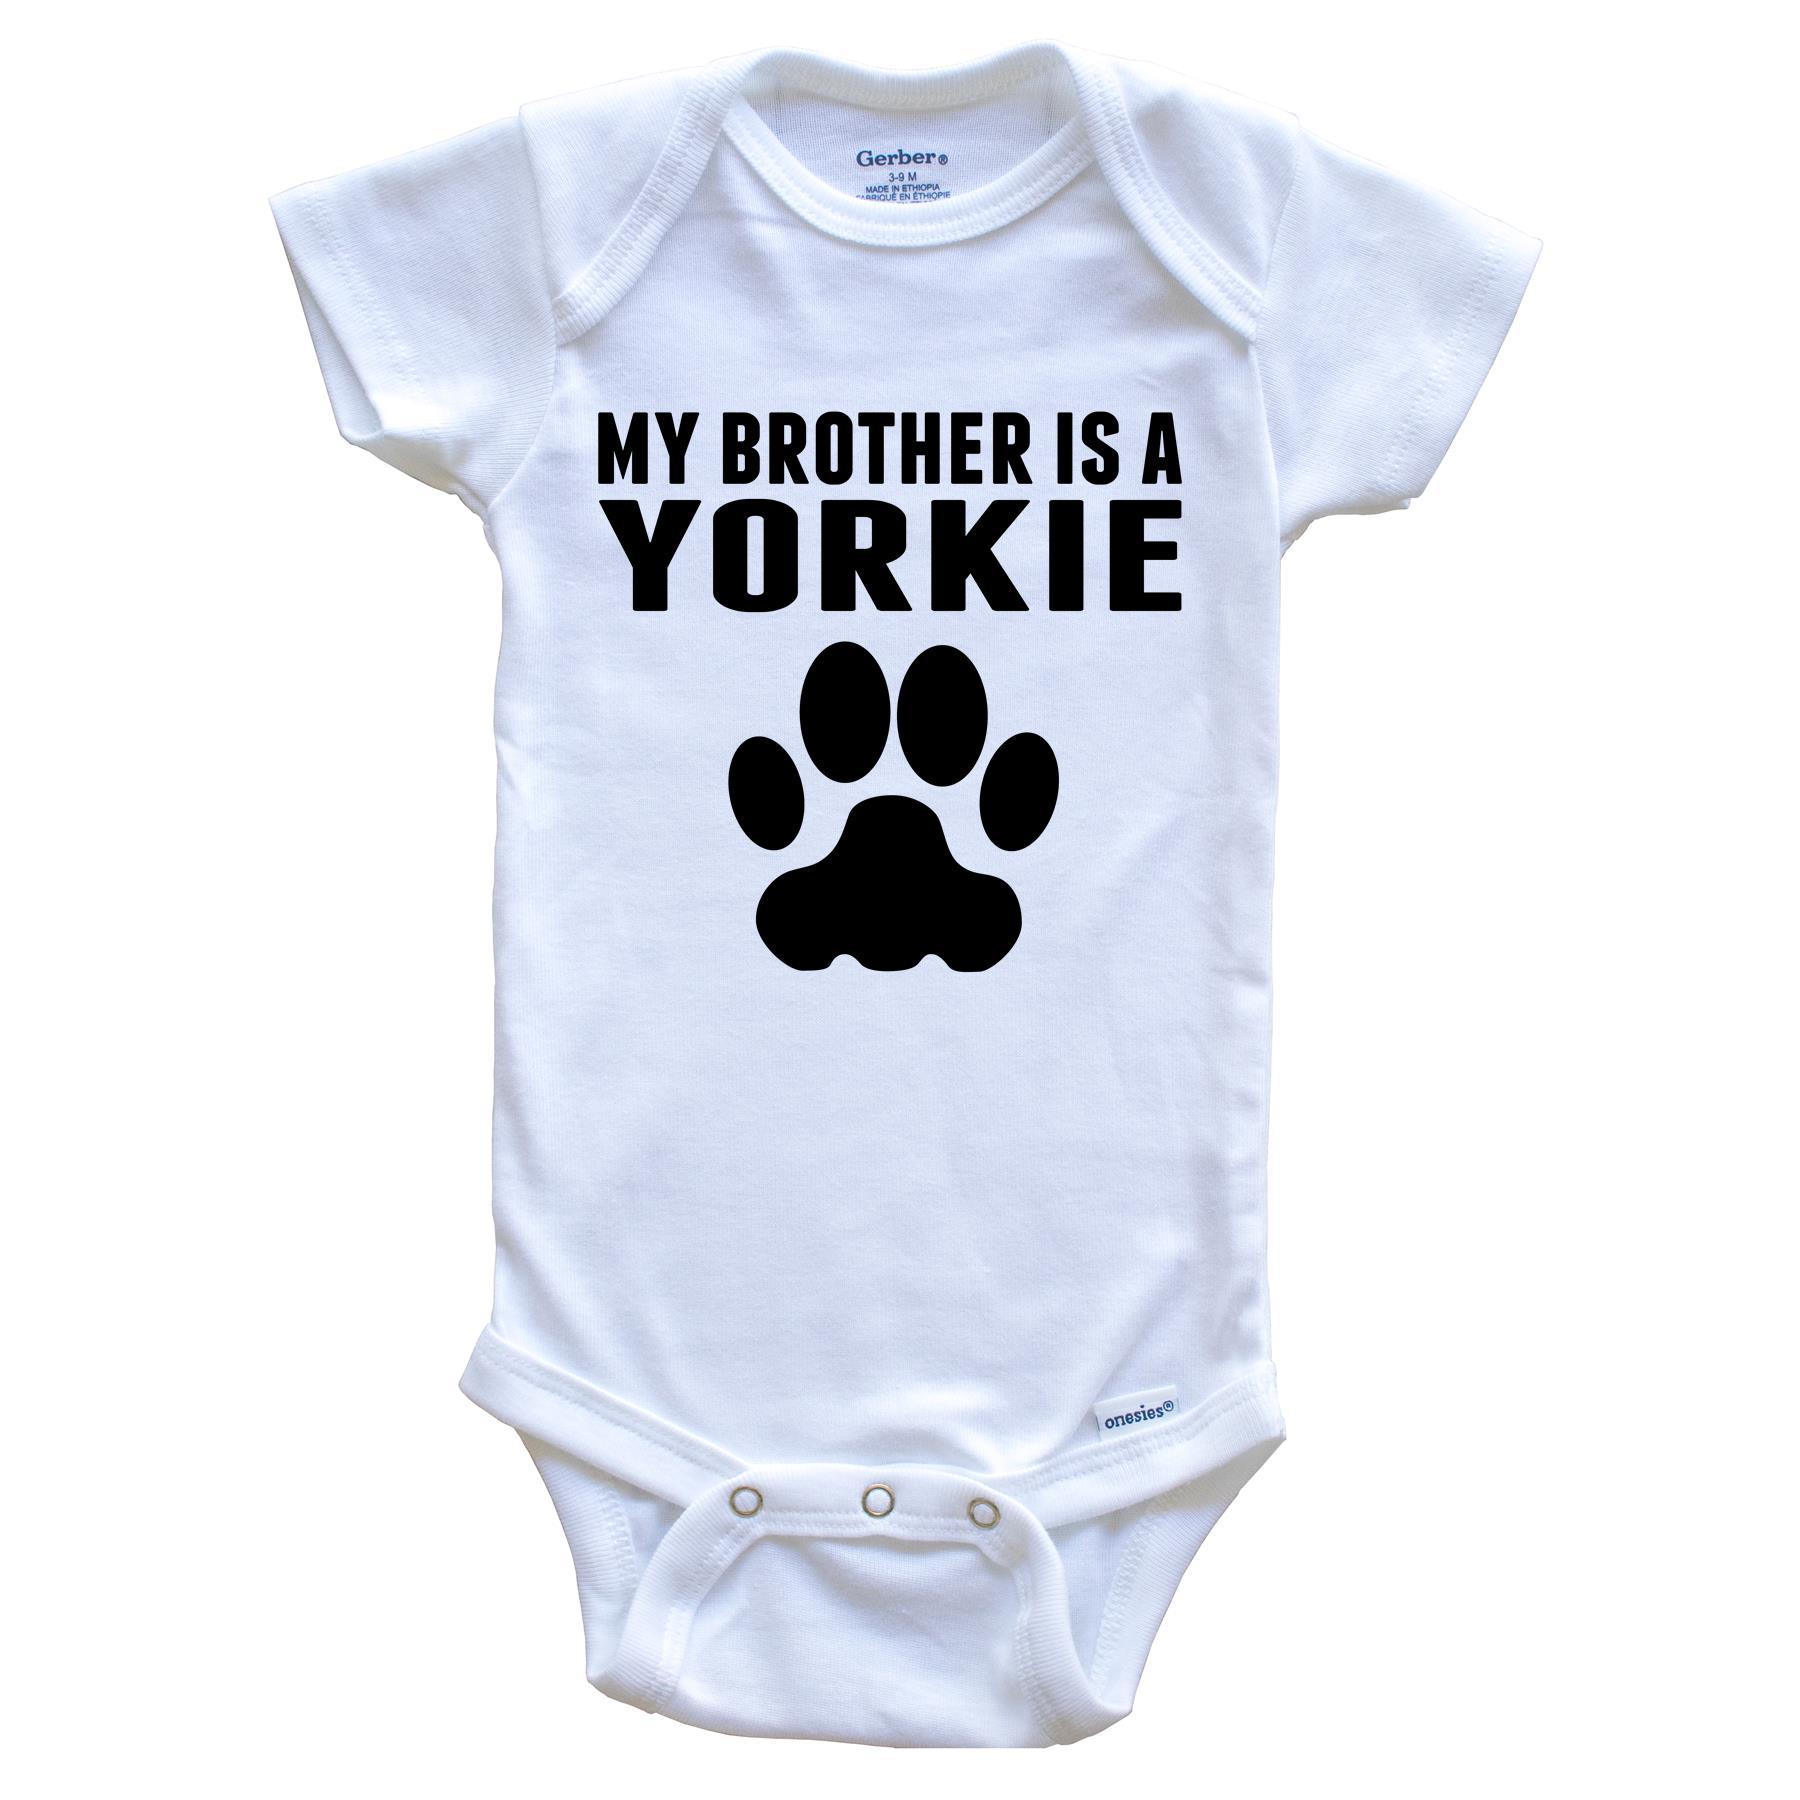 My Brother Is A Yorkie Baby Onesie